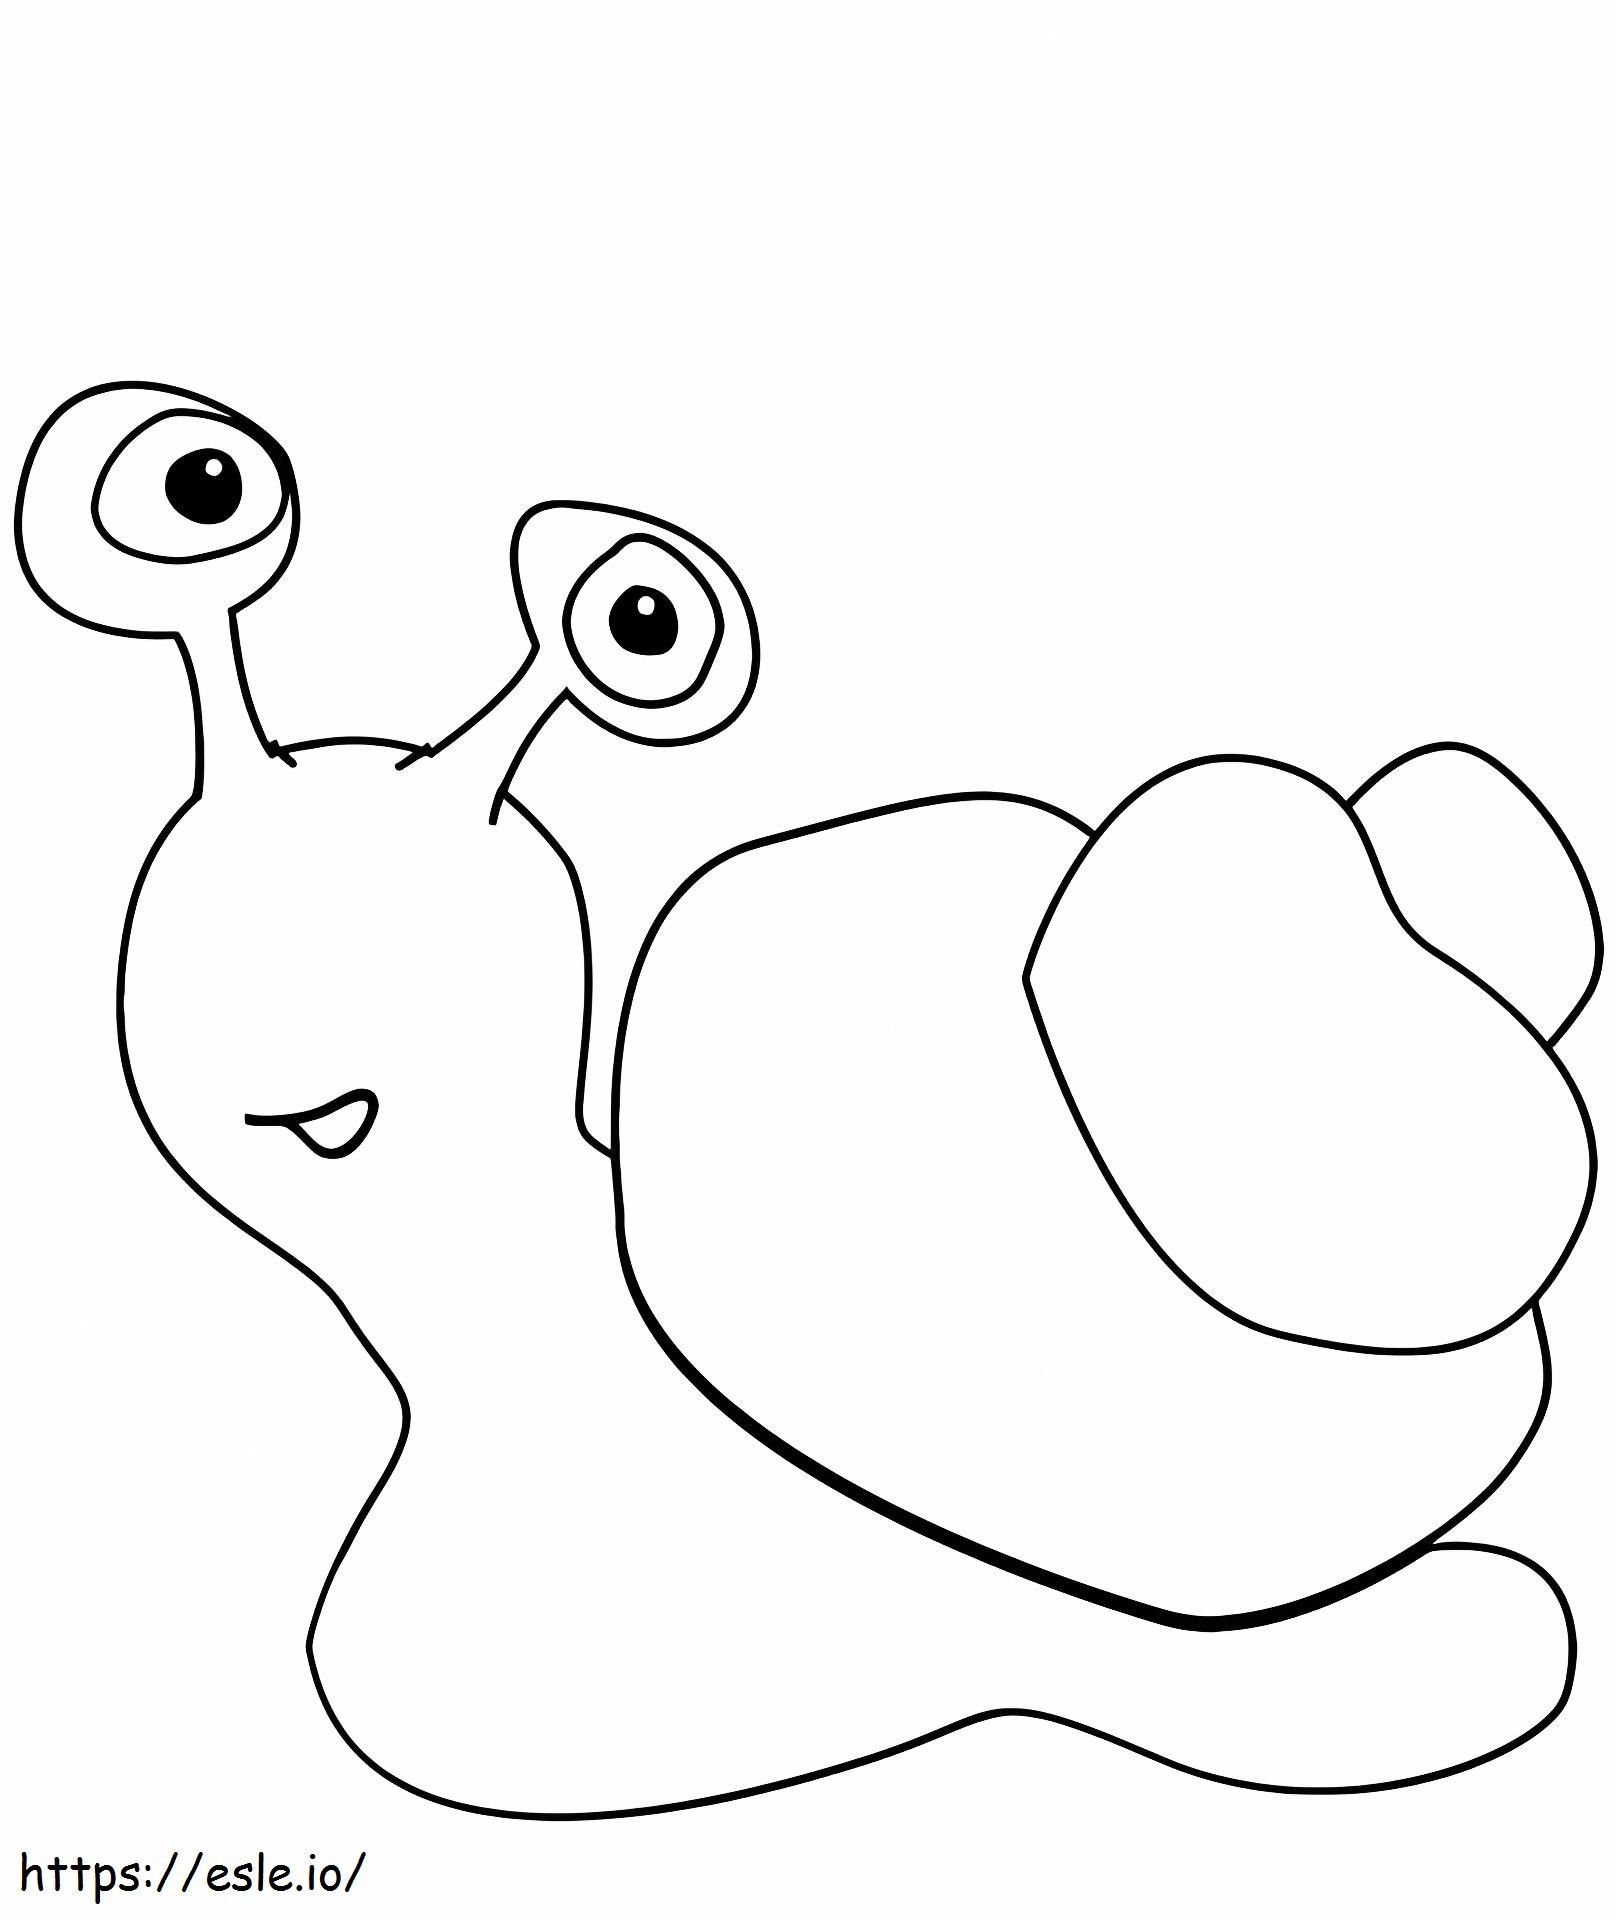 Cartoon Snail A4 coloring page